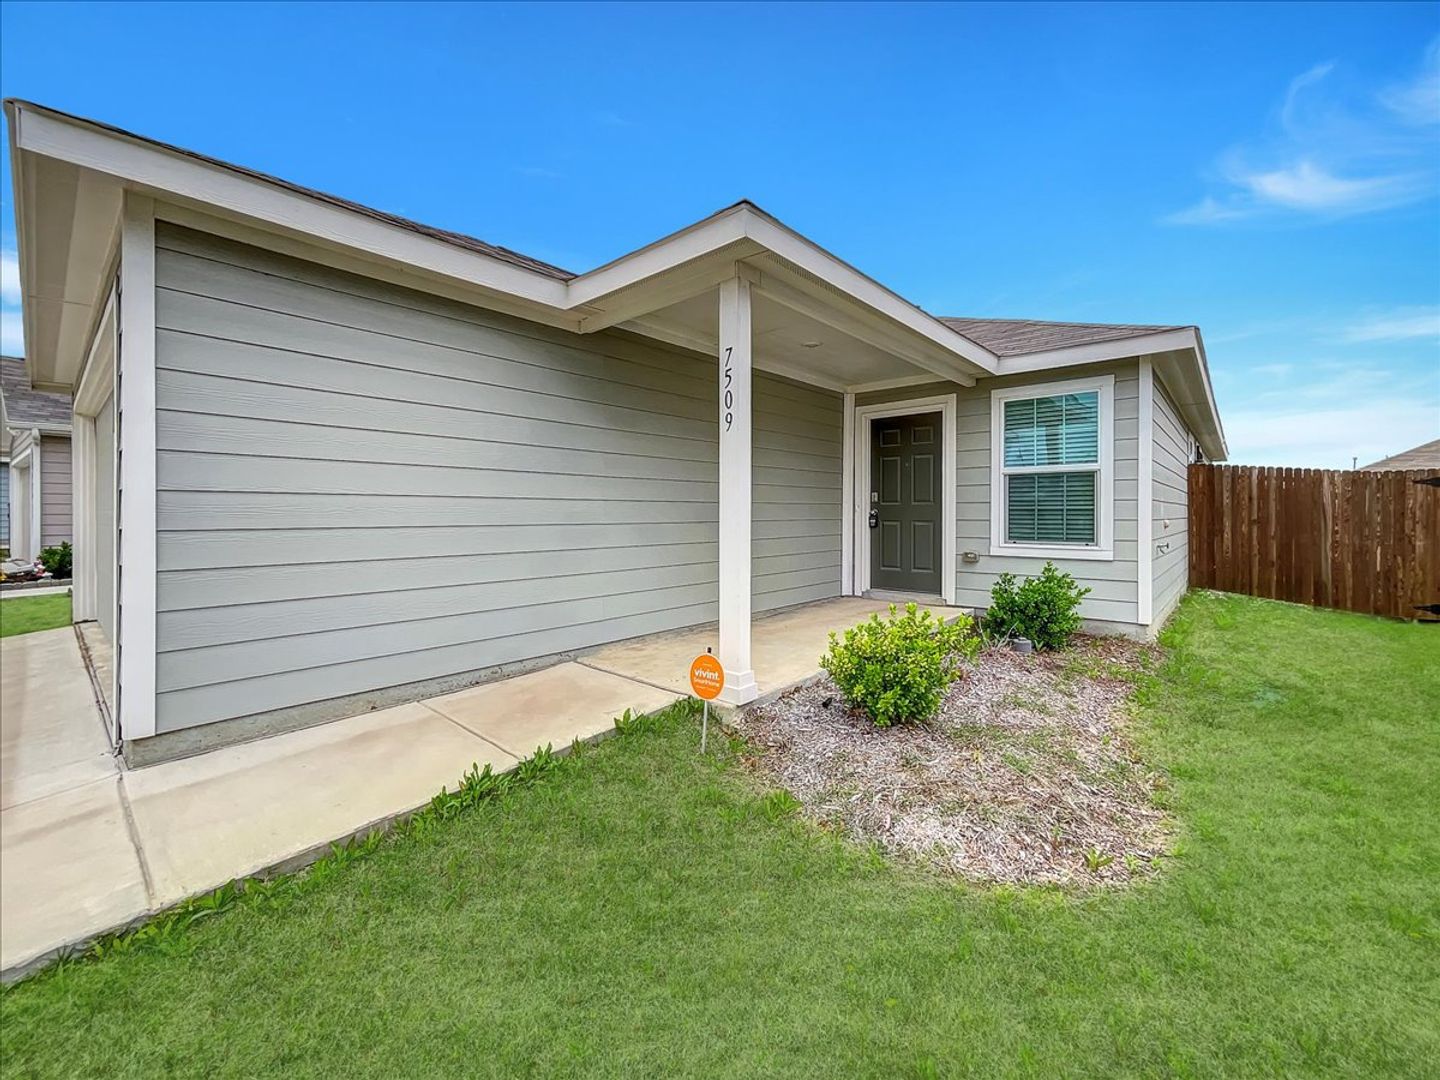 3-bed 2-bath in Plano's highly desirable Trinity Grove subdivision - Must See!!!